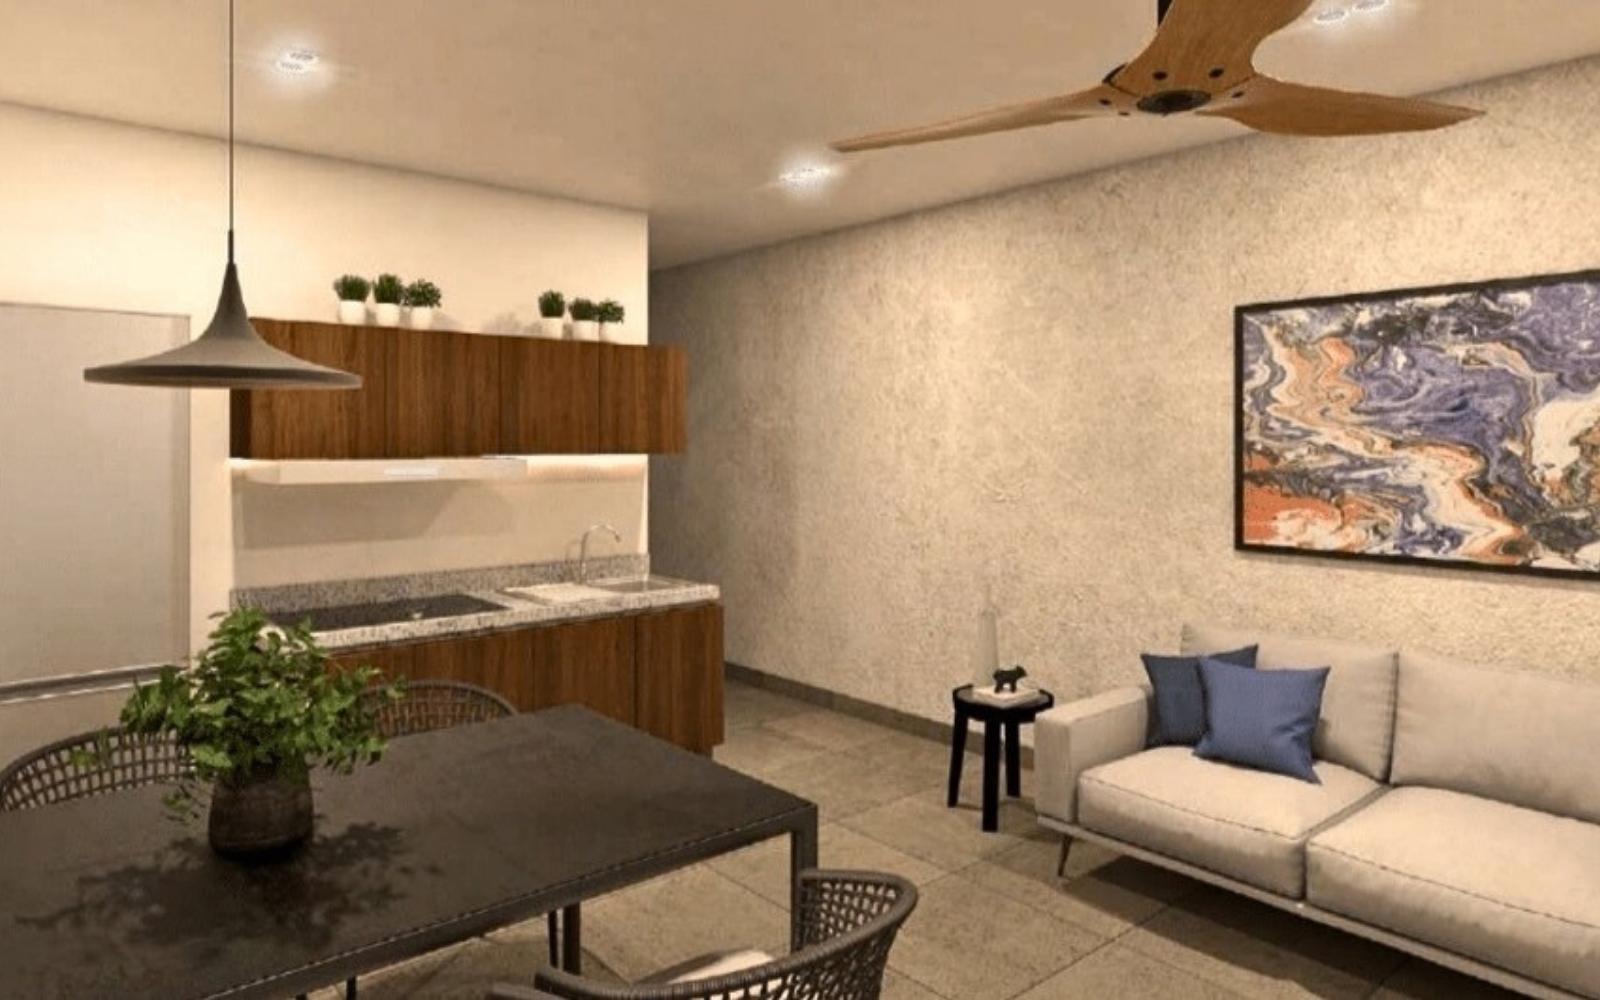 Condominium with private pool, double balcony, pet area, cigar lounge, coworking gym and more for sale Merida Norte